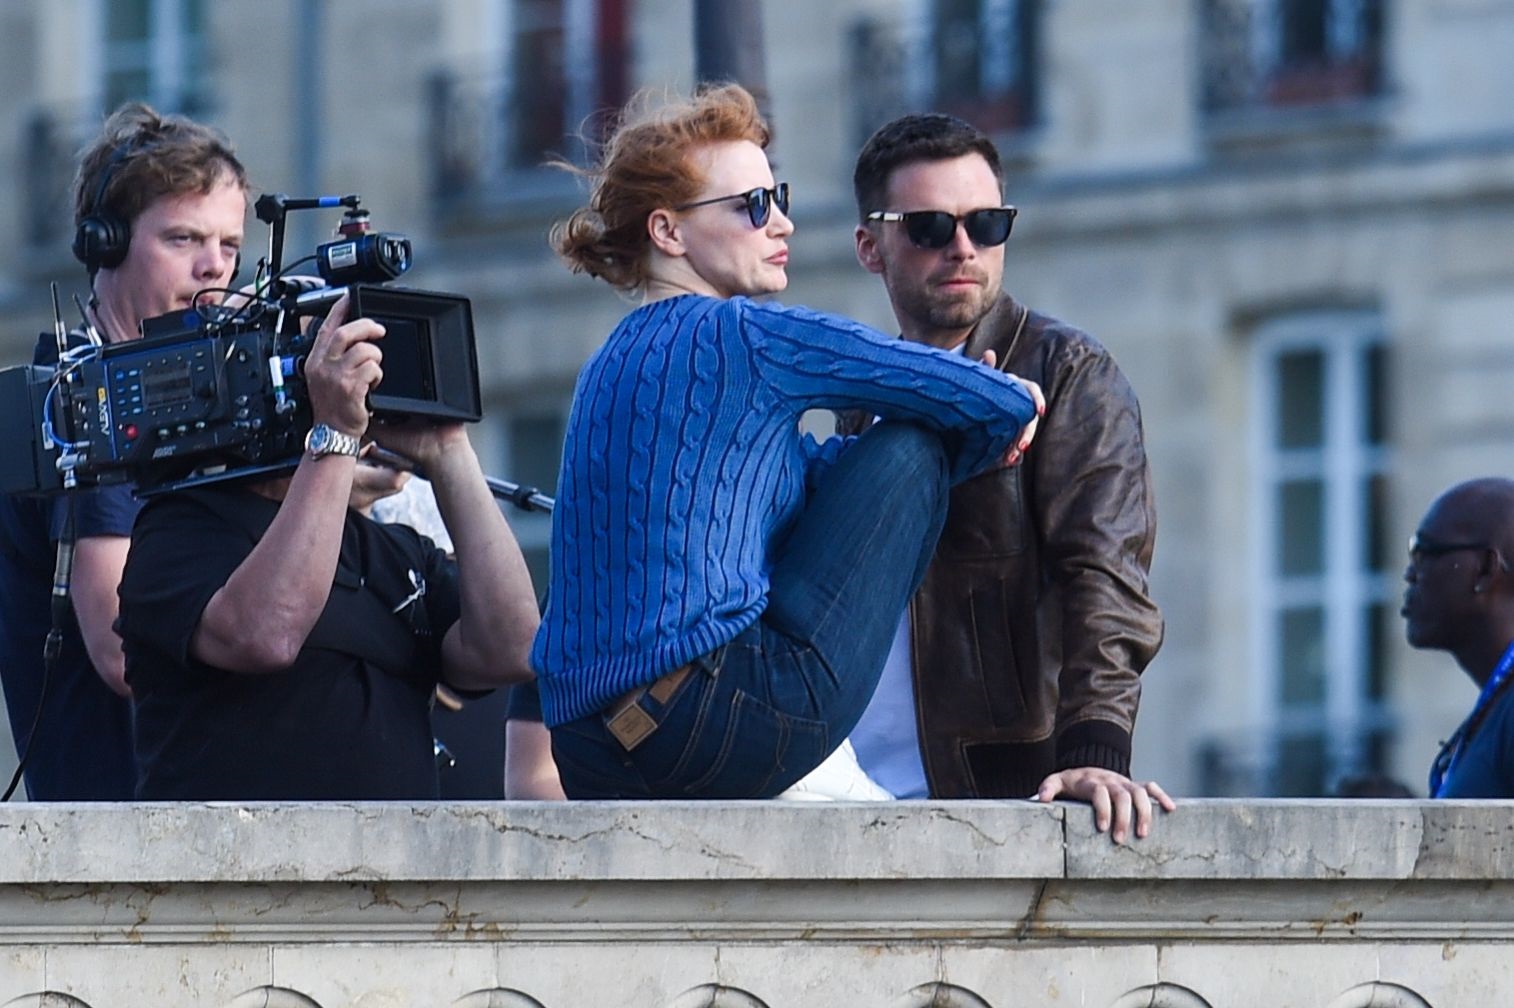 Jessica Chastain On The Sets Of 355 In Paris